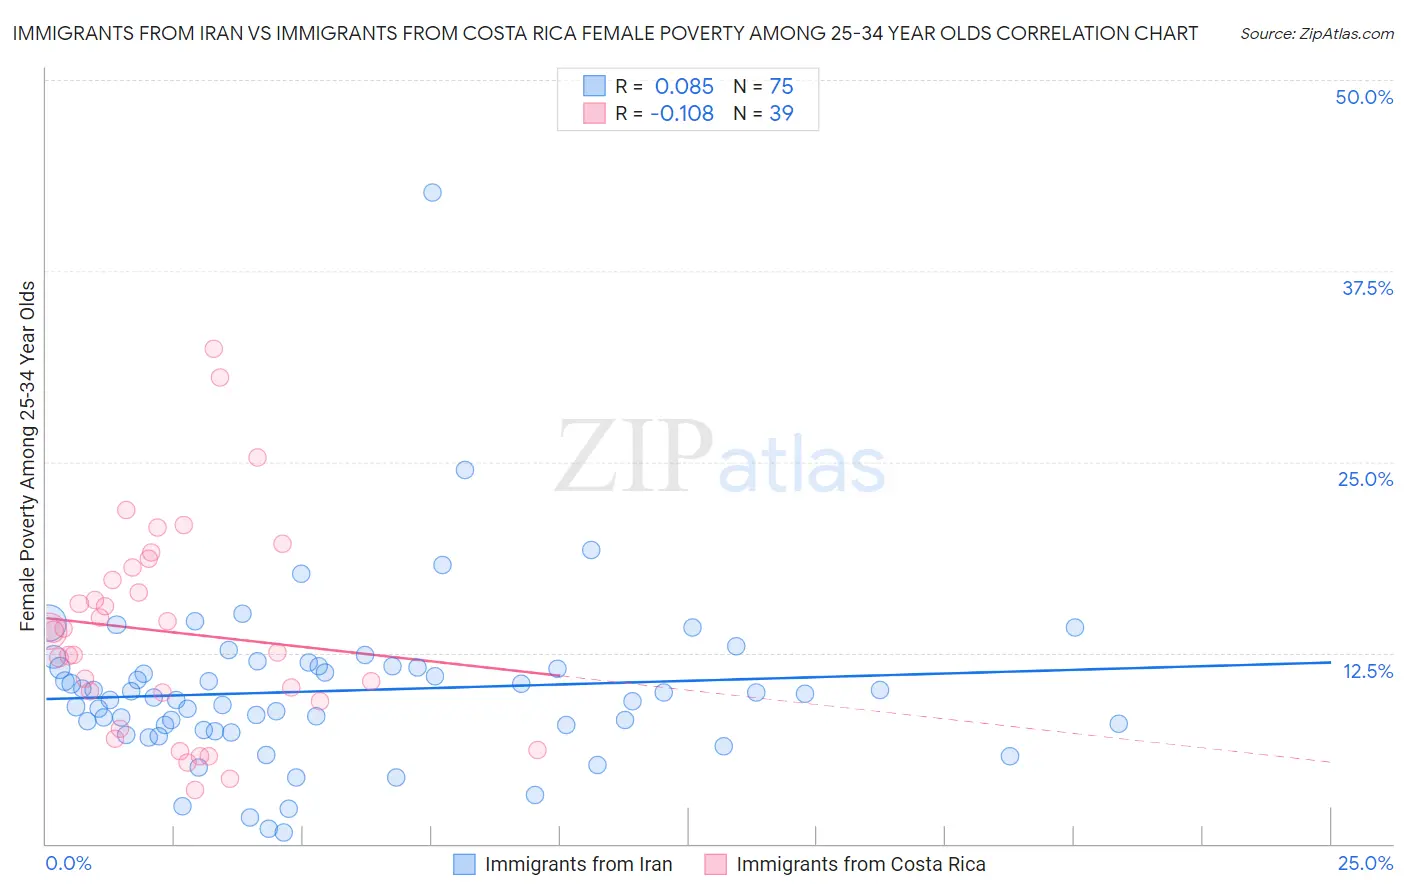 Immigrants from Iran vs Immigrants from Costa Rica Female Poverty Among 25-34 Year Olds